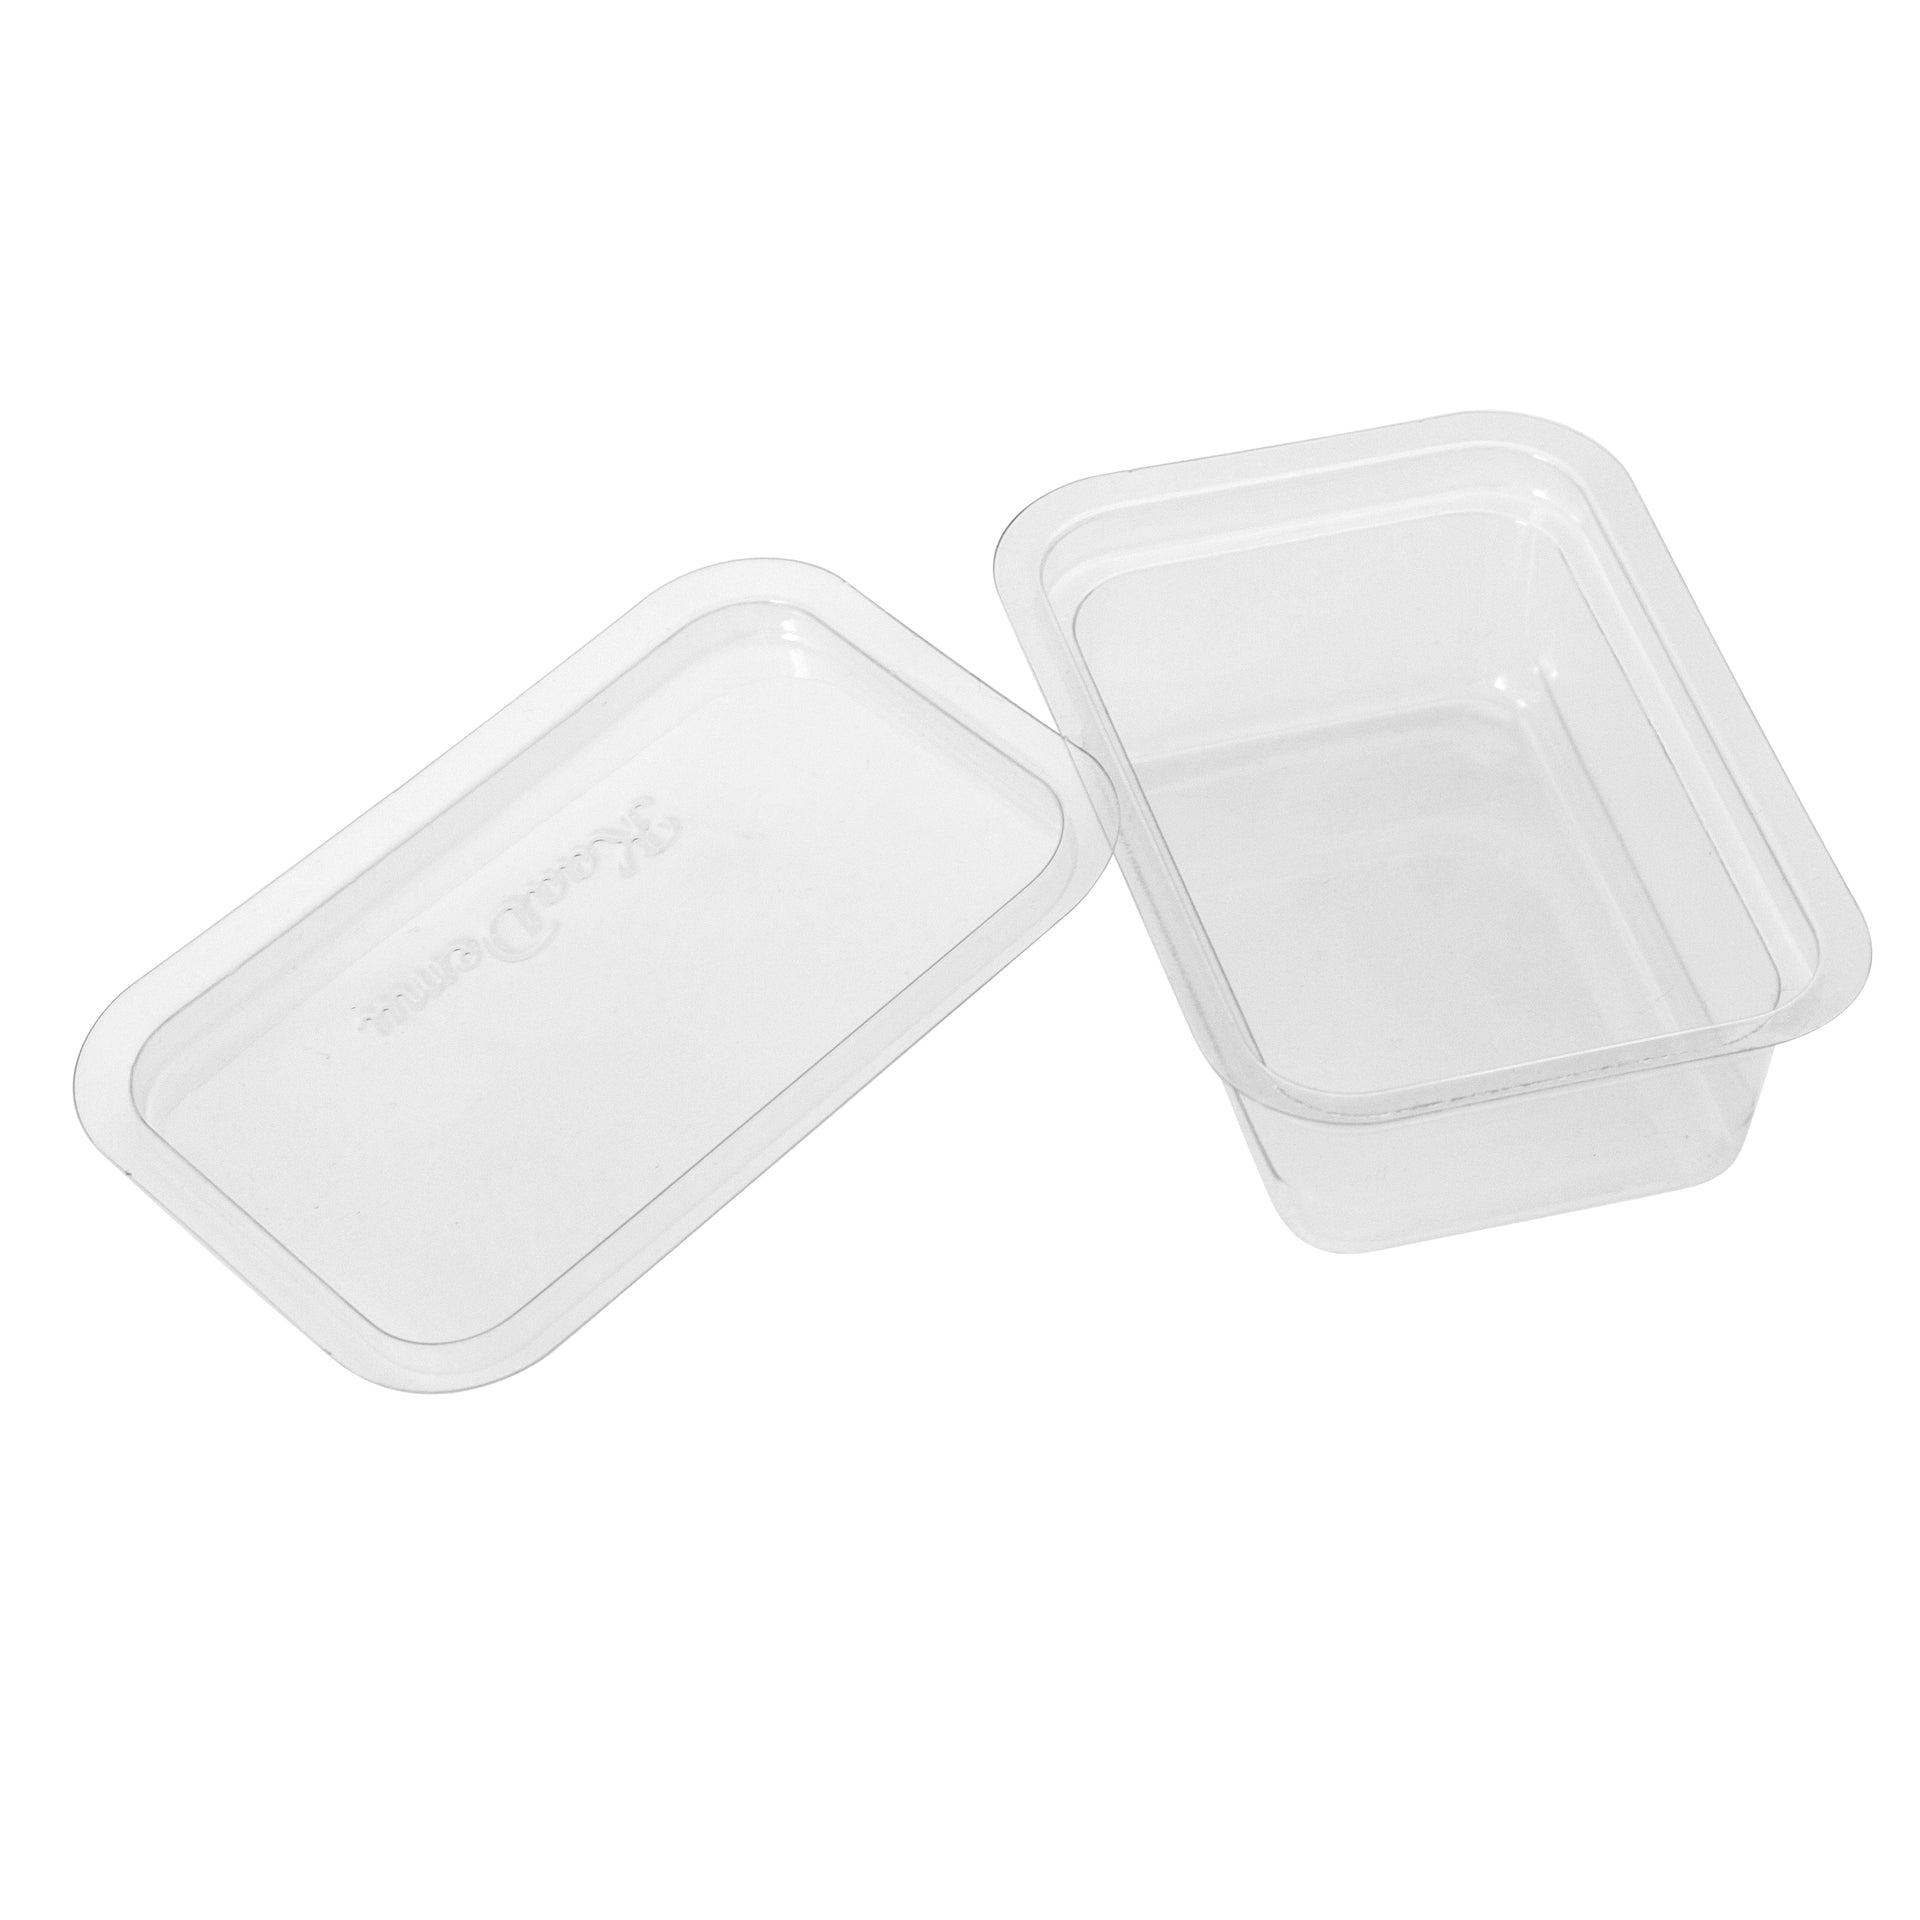 Soap Mold Container with Lid Clam Shell Packaging Set